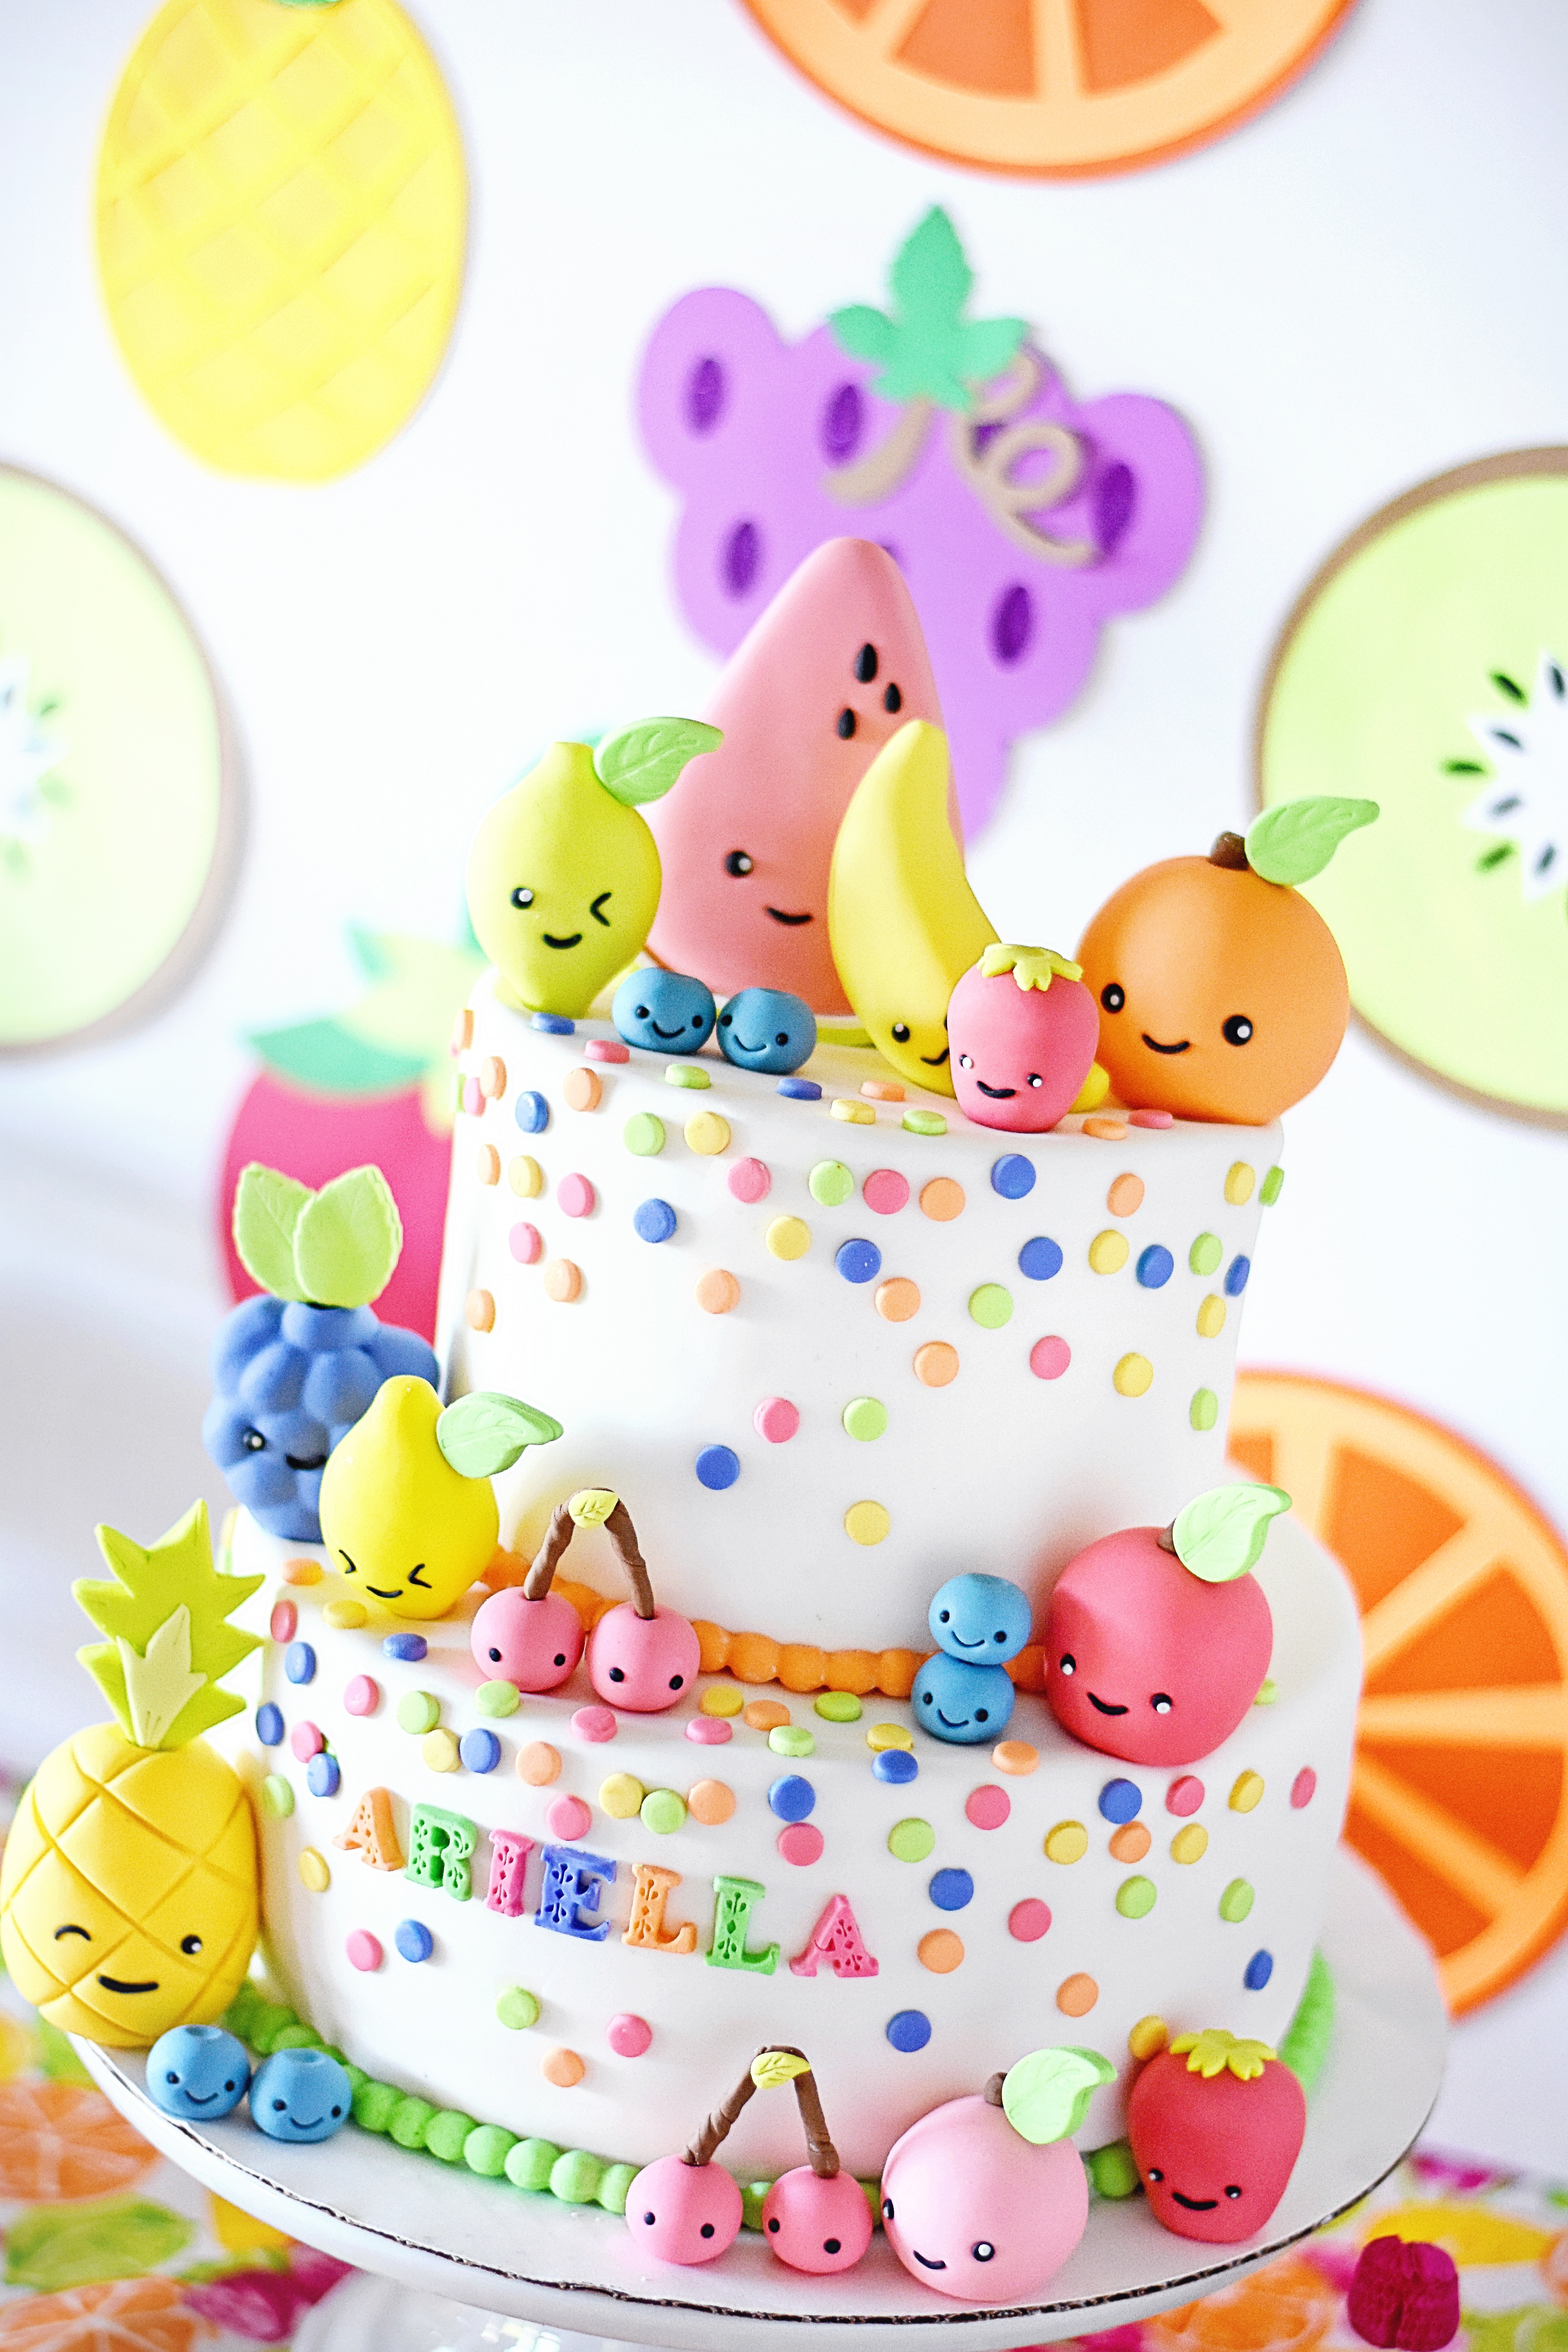 Kawaii Fruit Cake Toppers by Les Pop Sweets - Project Nursery